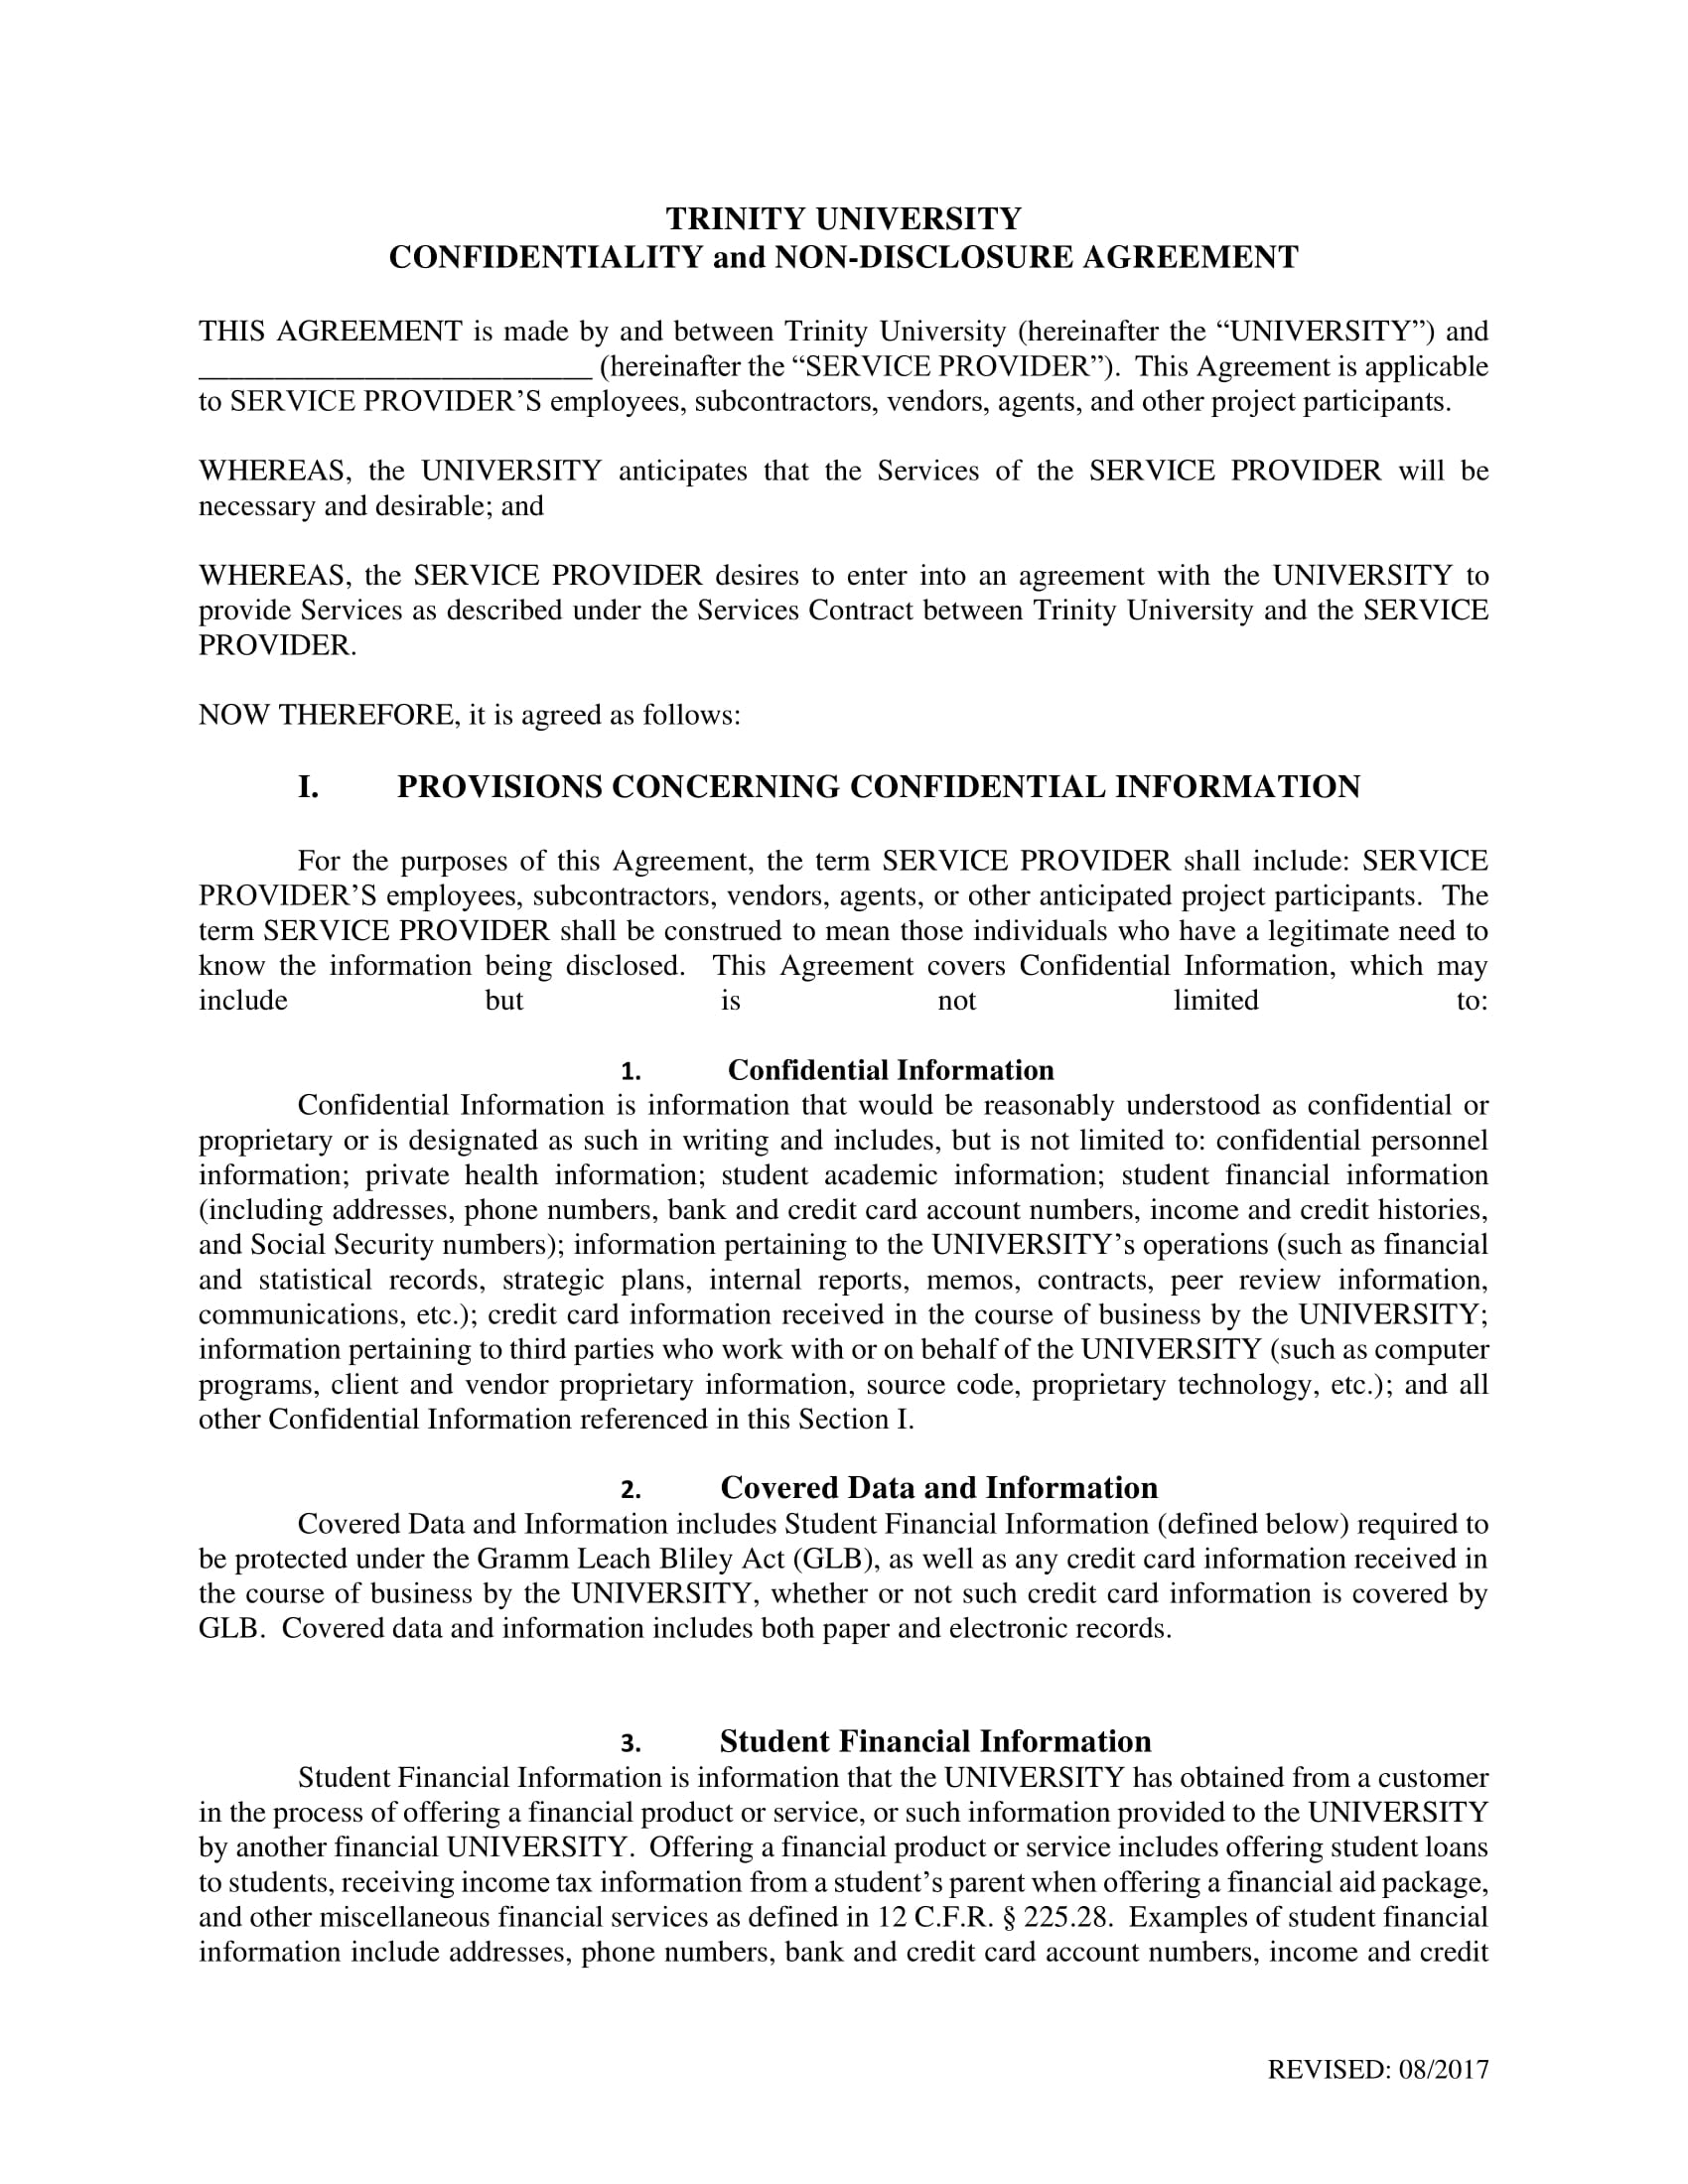 Standard Non Disclosure Agreement Pdf 9 Non Disclosure Confidentiality Agreement Examples Pdf Examples